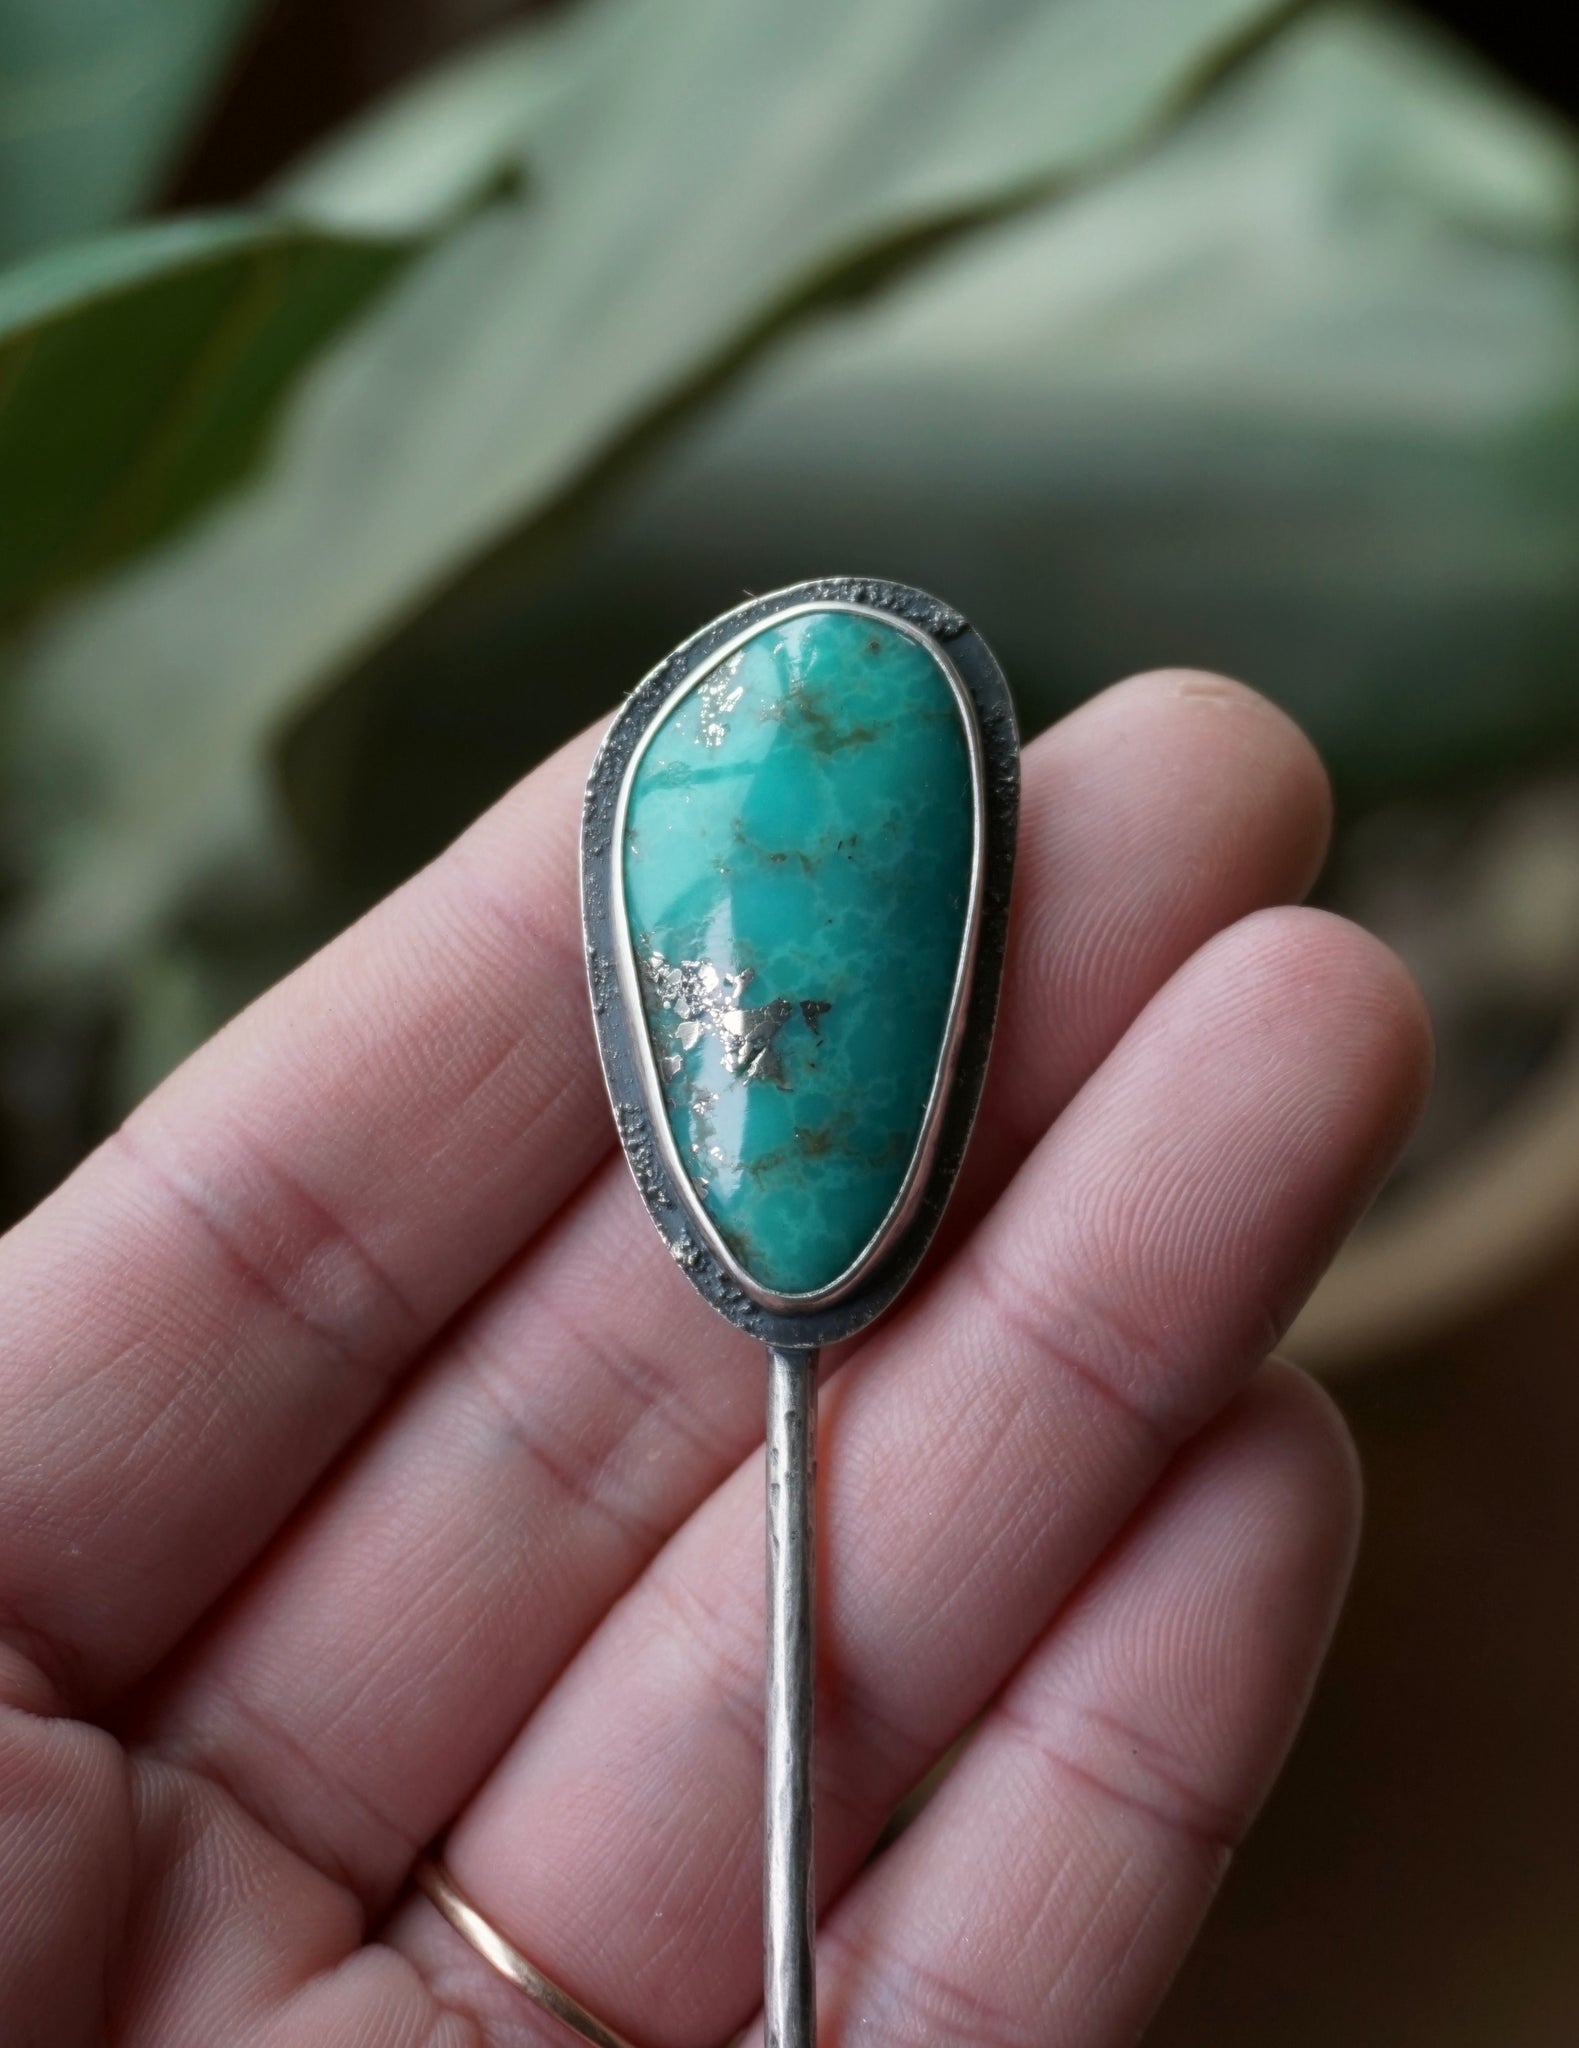 Large Campitos Turquoise Hair Gem Pin in Handcrafted Sterling